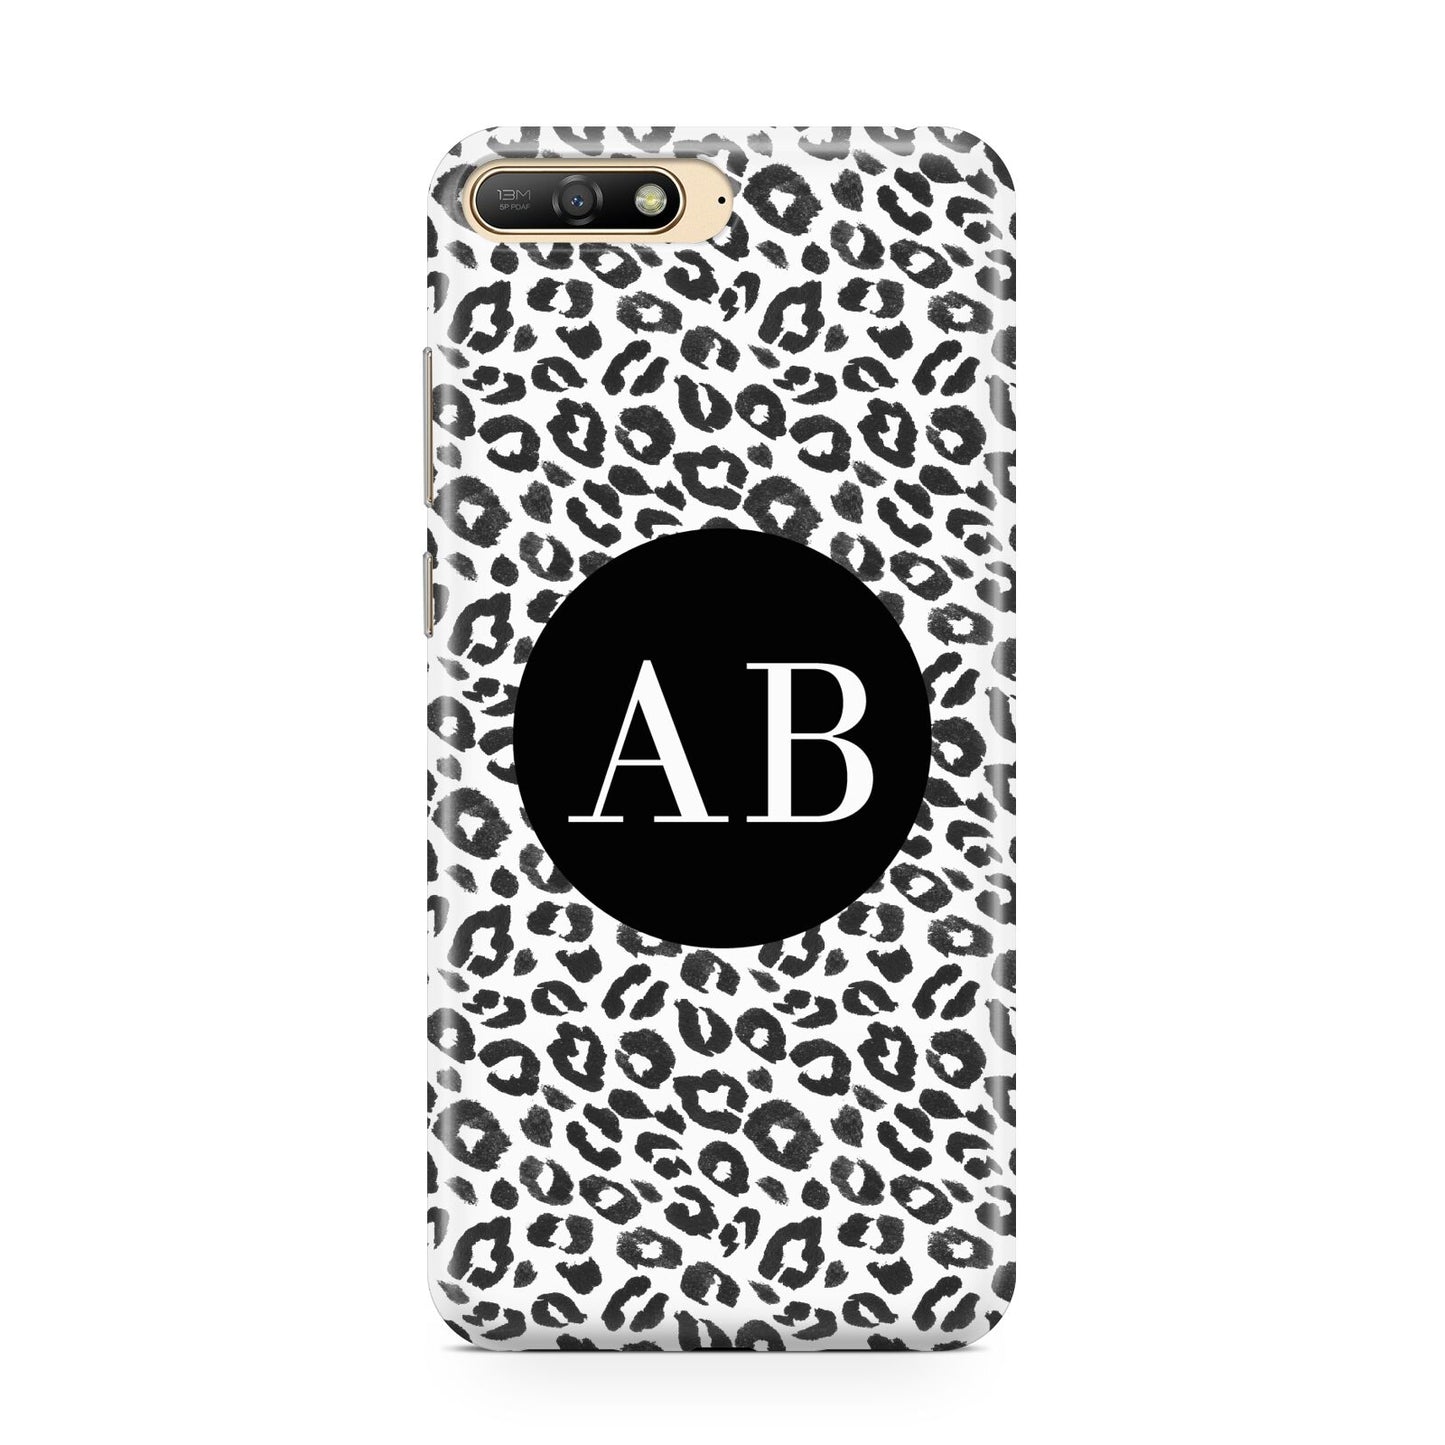 Leopard Print Black and White Huawei Y6 2018